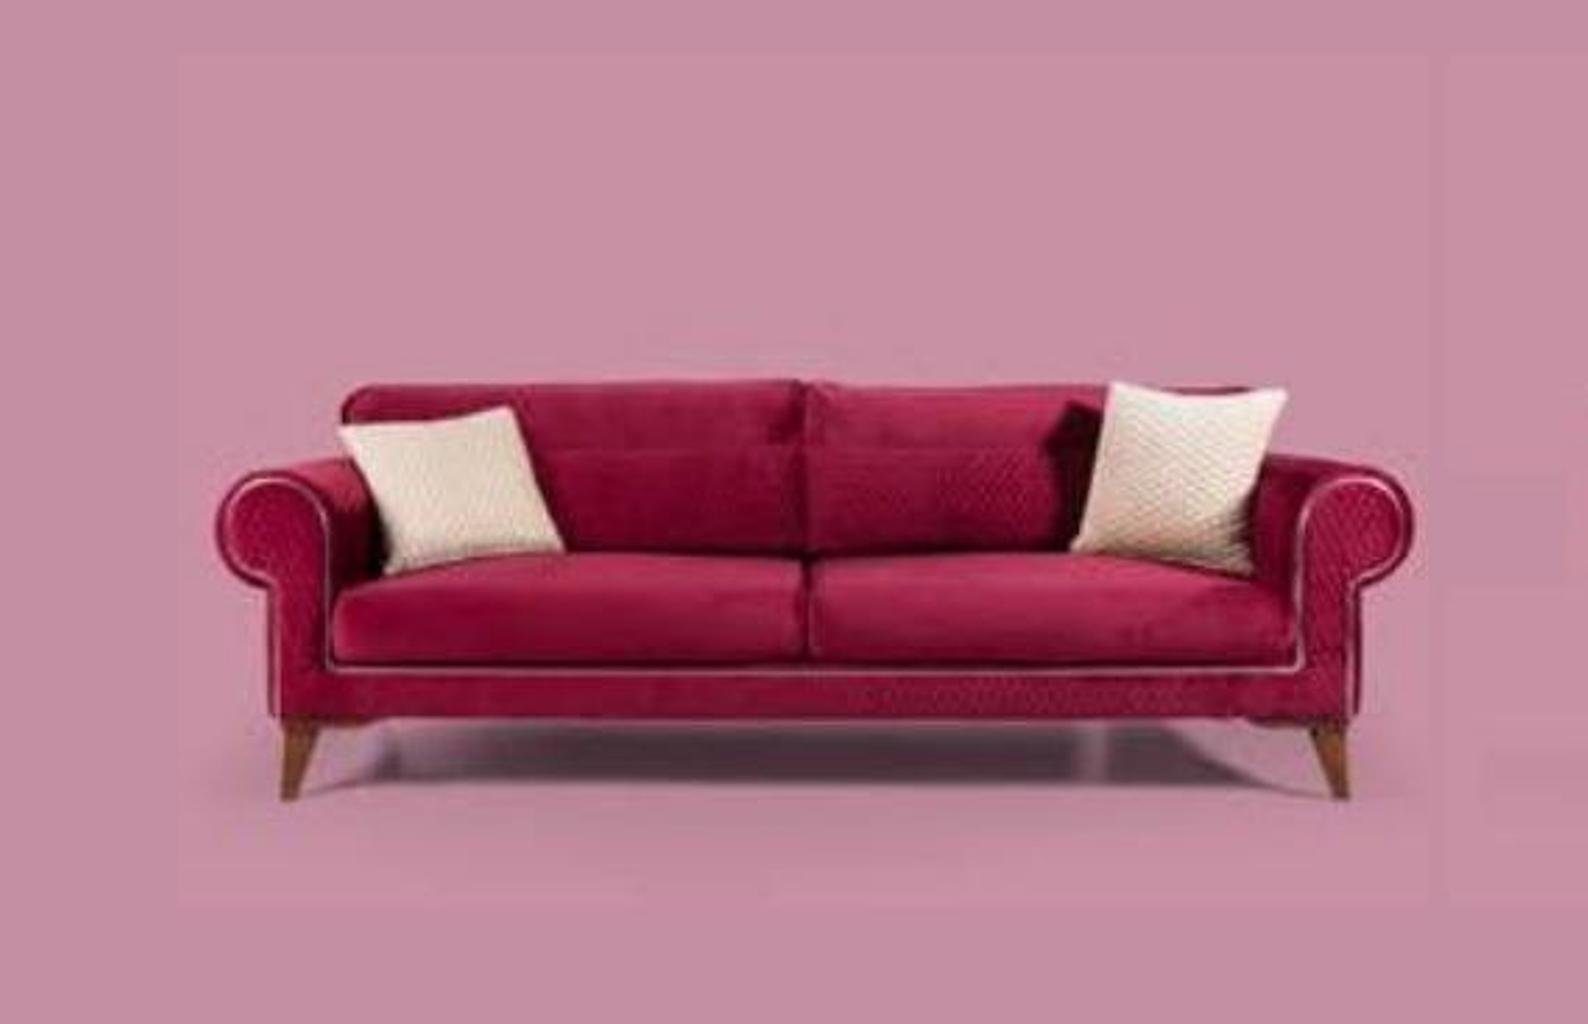 Europe Rotes Sofas Couch Sitz JVmoebel Polster Luxus 3 Textil Made Sofa Sofa in Möbel,